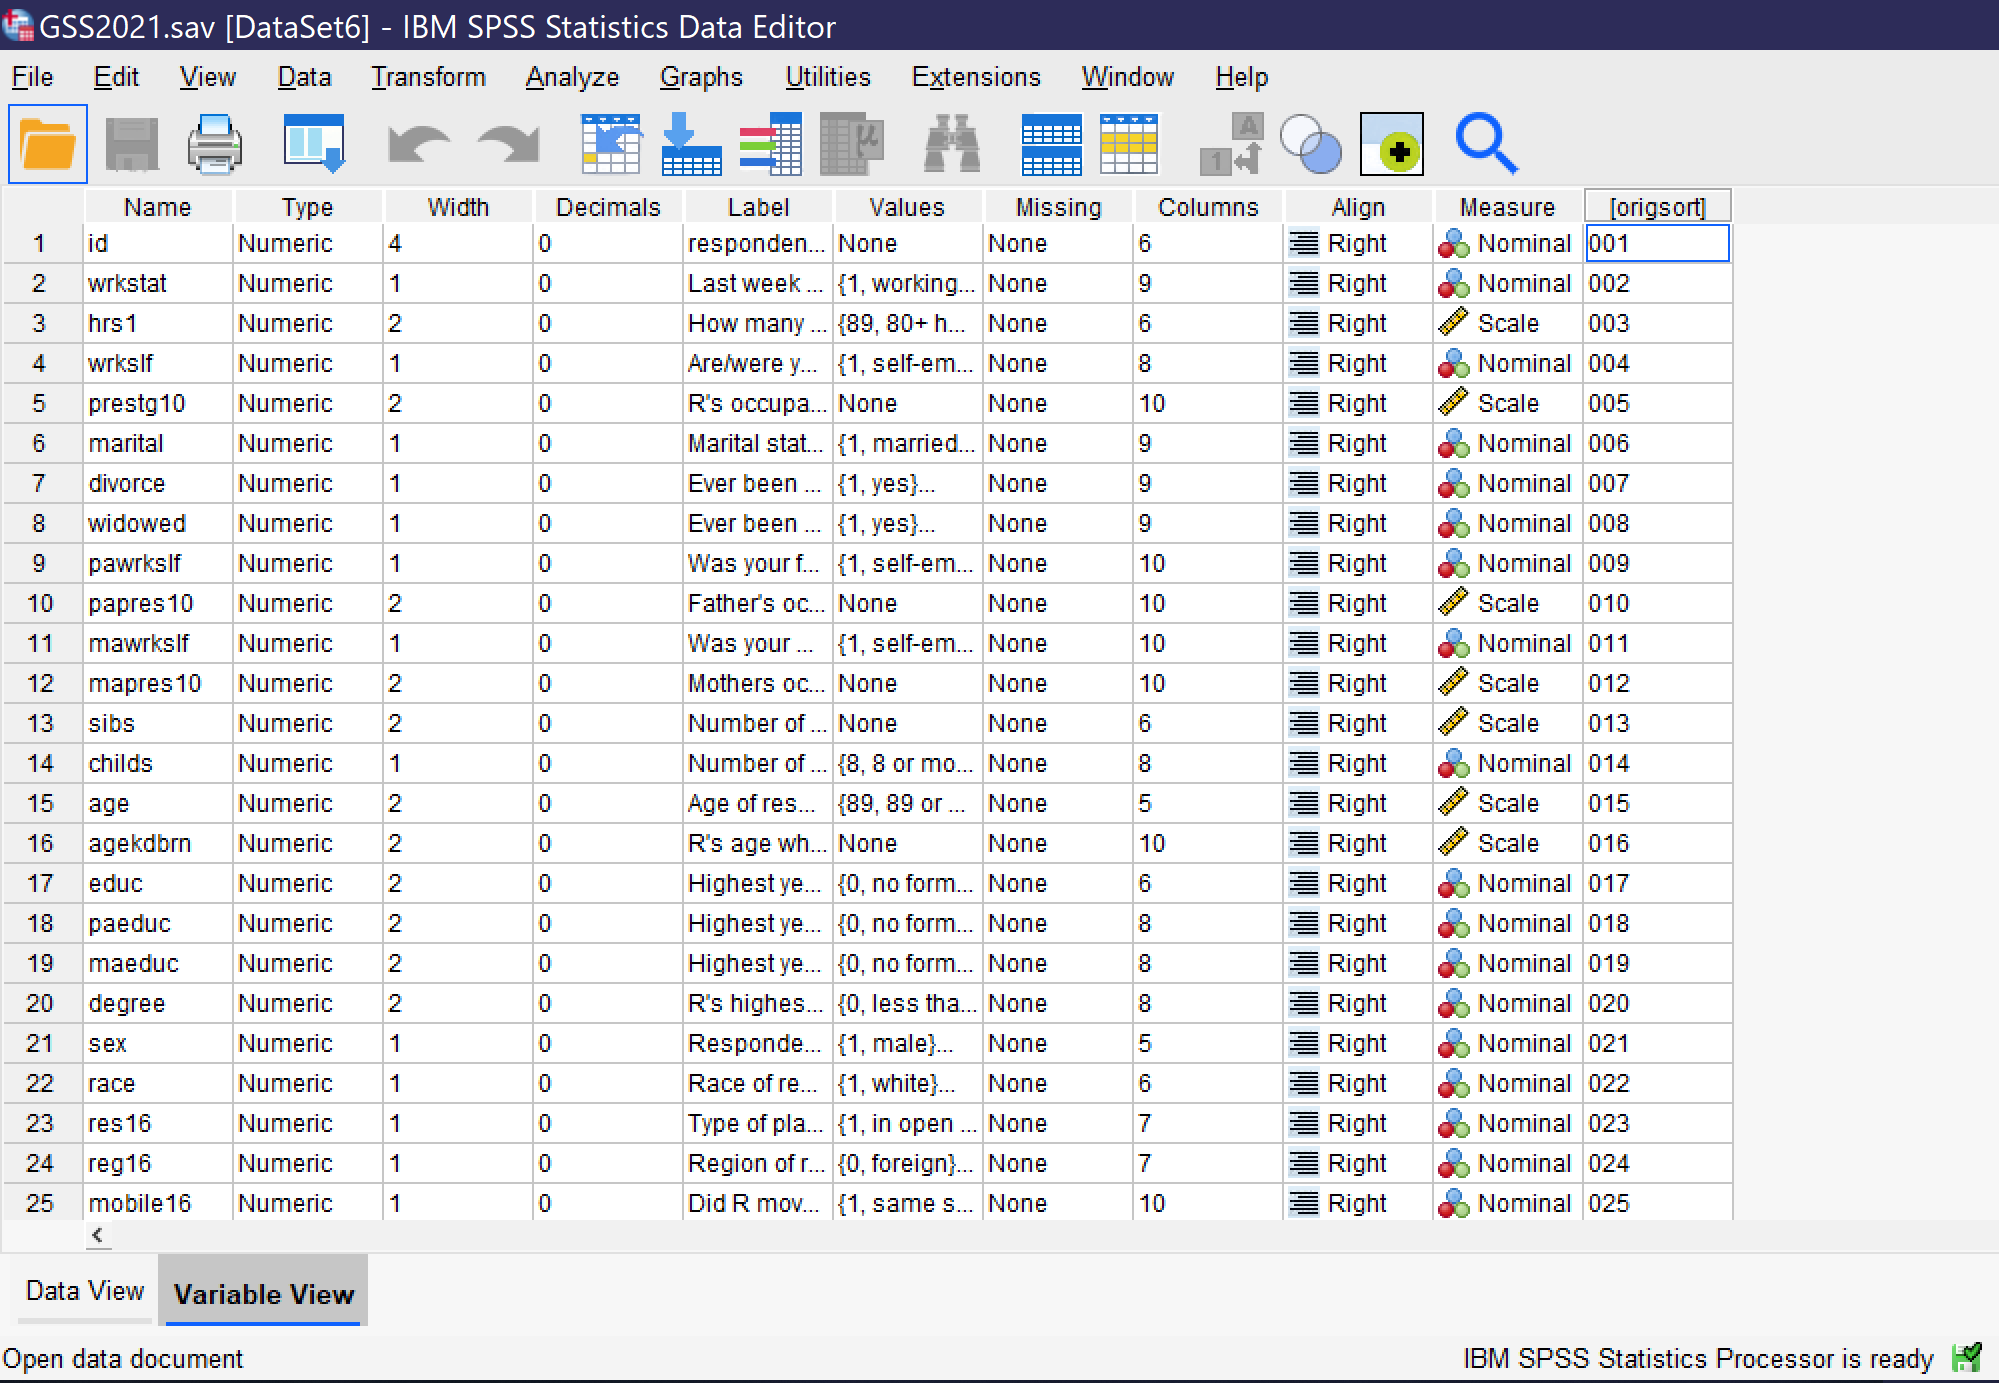 A screenshot of variable view in SPSS. Details are provided in the text.